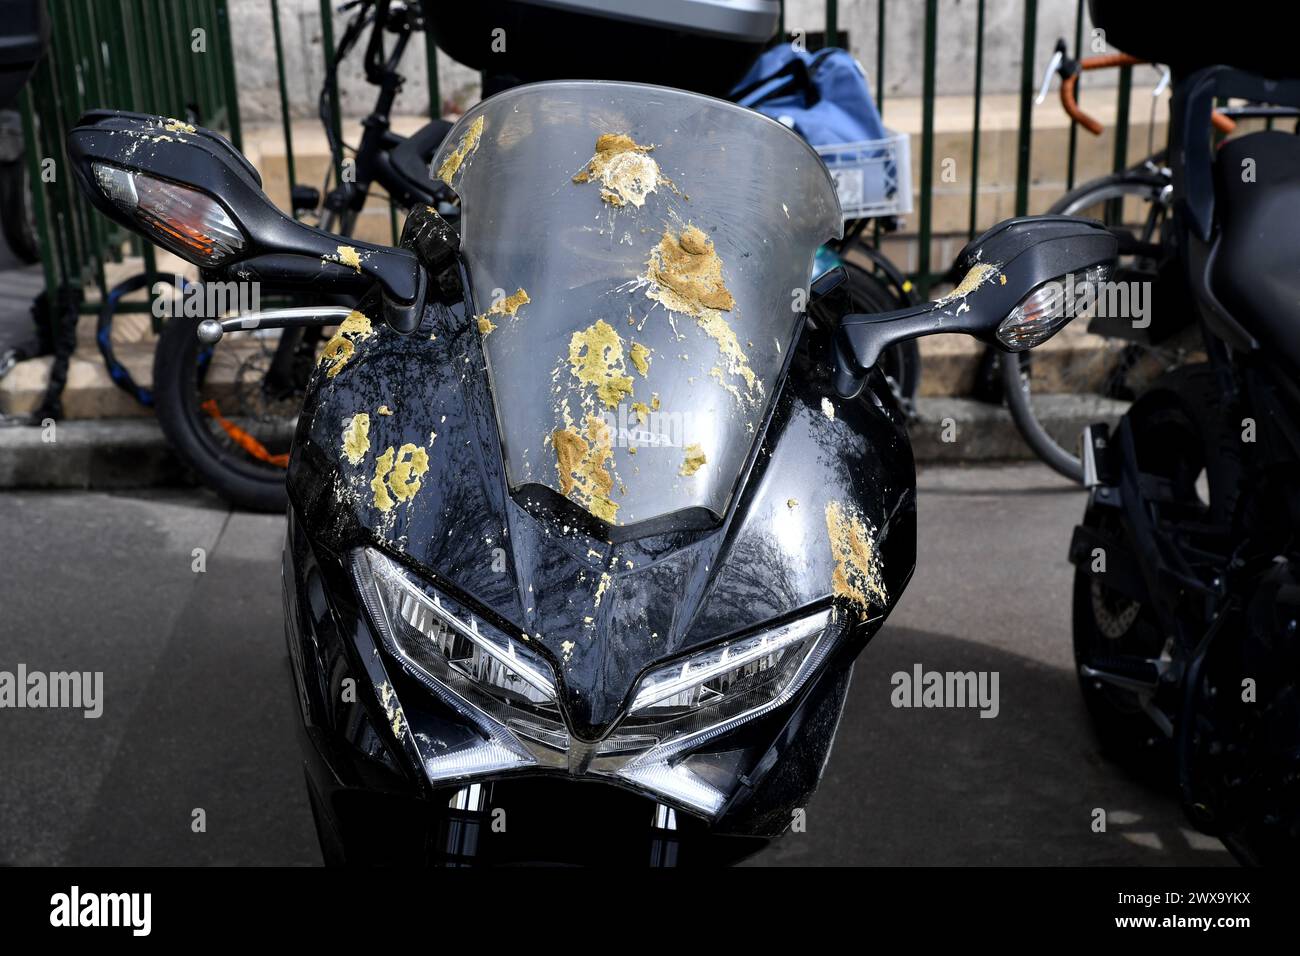 Pigeon droppings on a motorbike, Paris, France Stock Photo